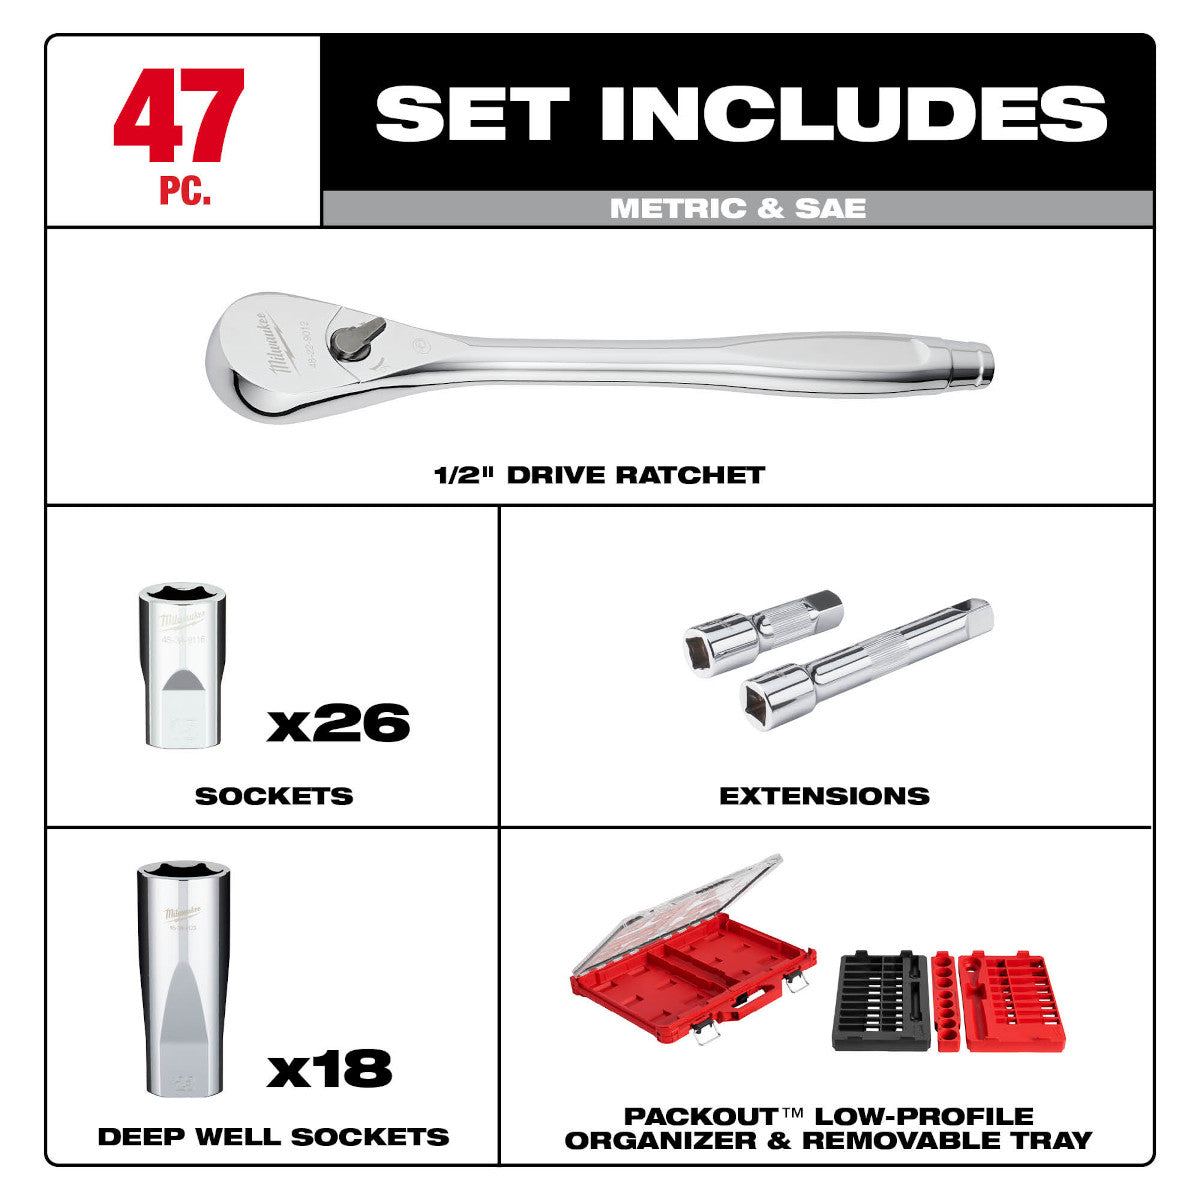 Milwaukee 48-22-9487 1/2" Drive 47 Piece Ratchet & Socket Set with PACKOUT Low-Profile Organizer - SAE & Metric